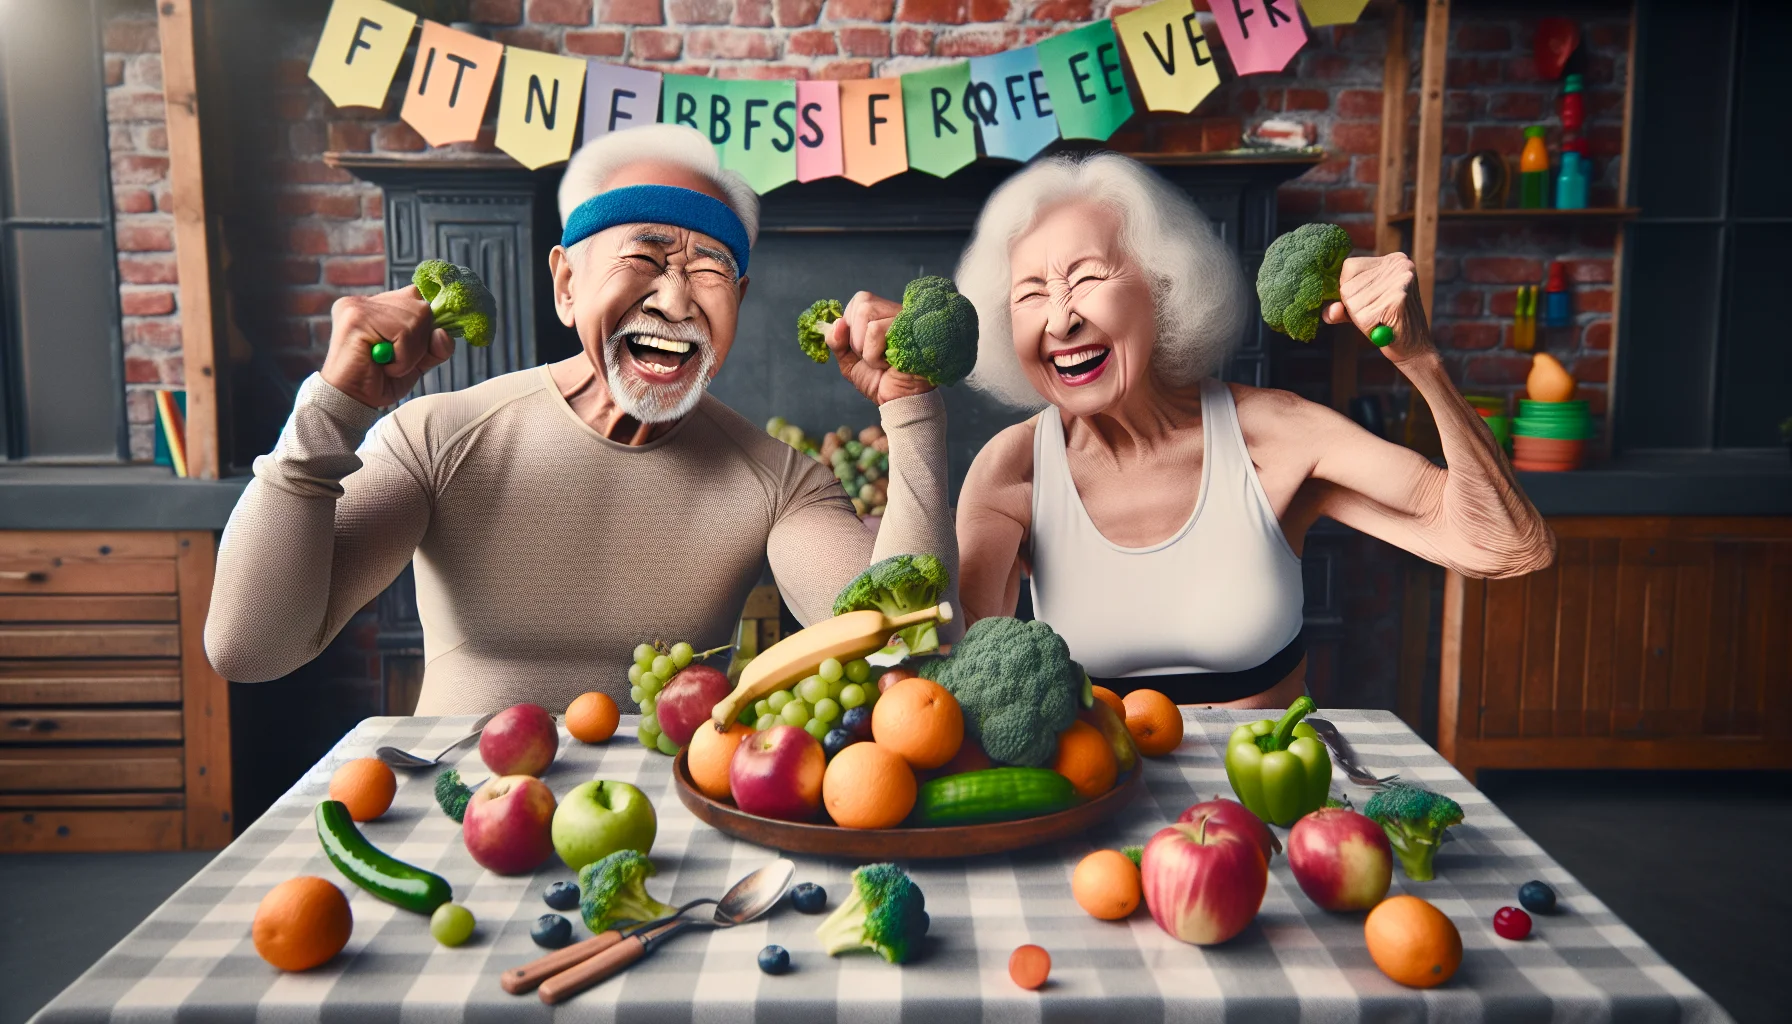 Generate a funny and realistic image showcasing a scene of healthy and wise aging. Picture an elderly South Asian man and an elderly Caucasian woman at a dining table full of colorful fruits and vegetables. They're wearing sweatbands and gym outfits as if they've just finished a workout session. Both are holding a piece of broccoli like it's a weightlifting dumbbell and they are animatedly flexing their muscles. Their faces are alive with laughter and wisdom. The table sits under a banner that reads 'Fitness Buffs Forever - Age is Just a Number!' in vibrant letters.